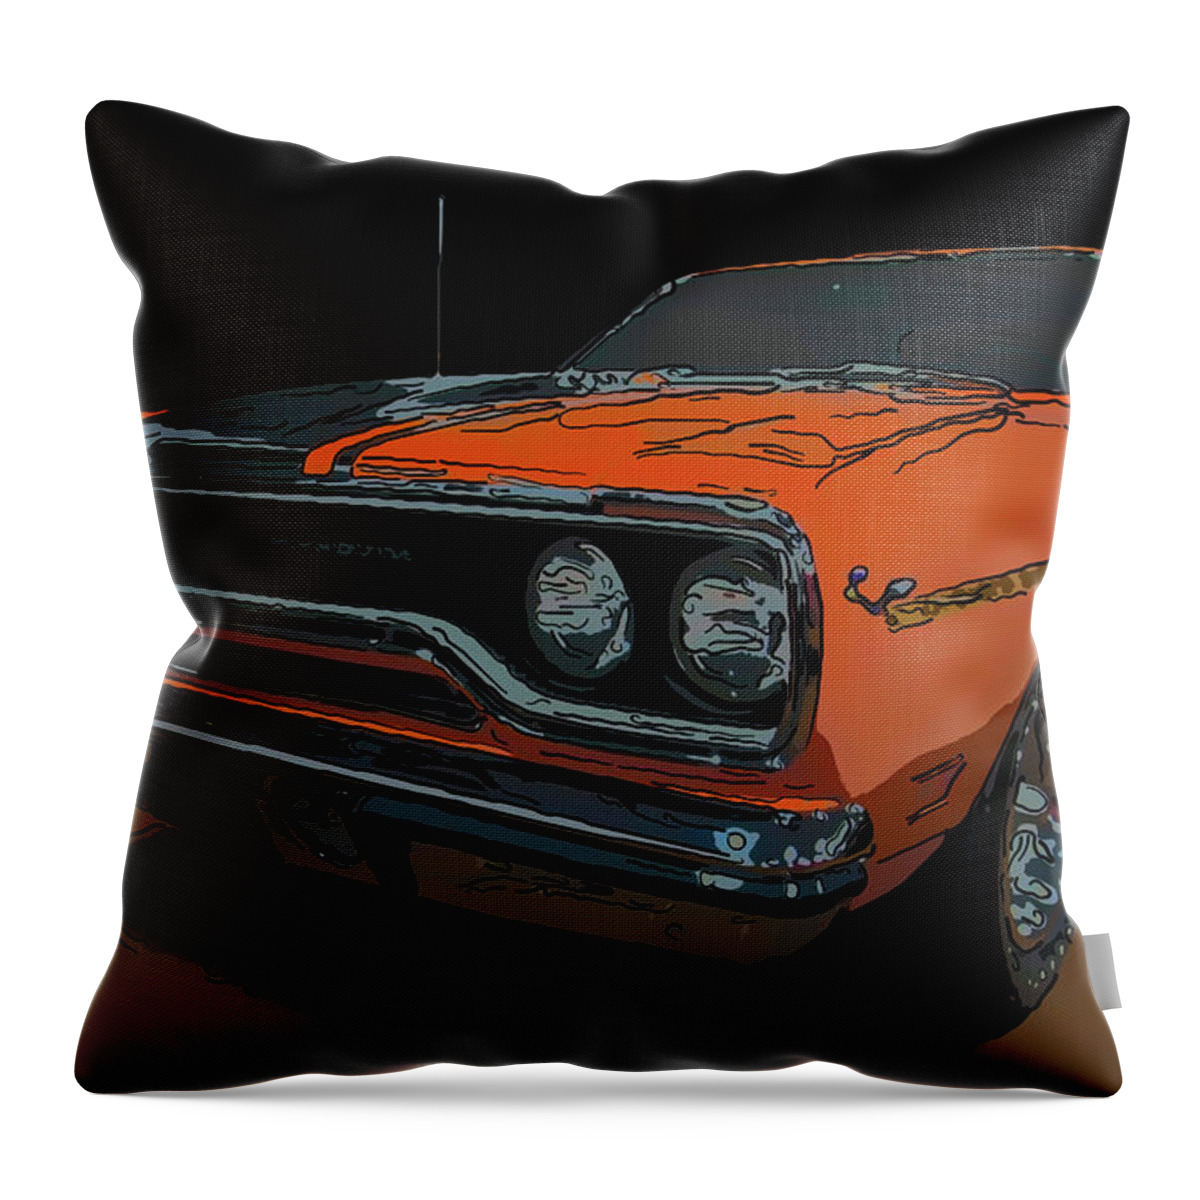 1970 Plymouth Roadrunner 440 Six Pack Throw Pillow featuring the drawing 1970 Plymouth Roadrunner 440 six pack digital drawing by Flees Photos